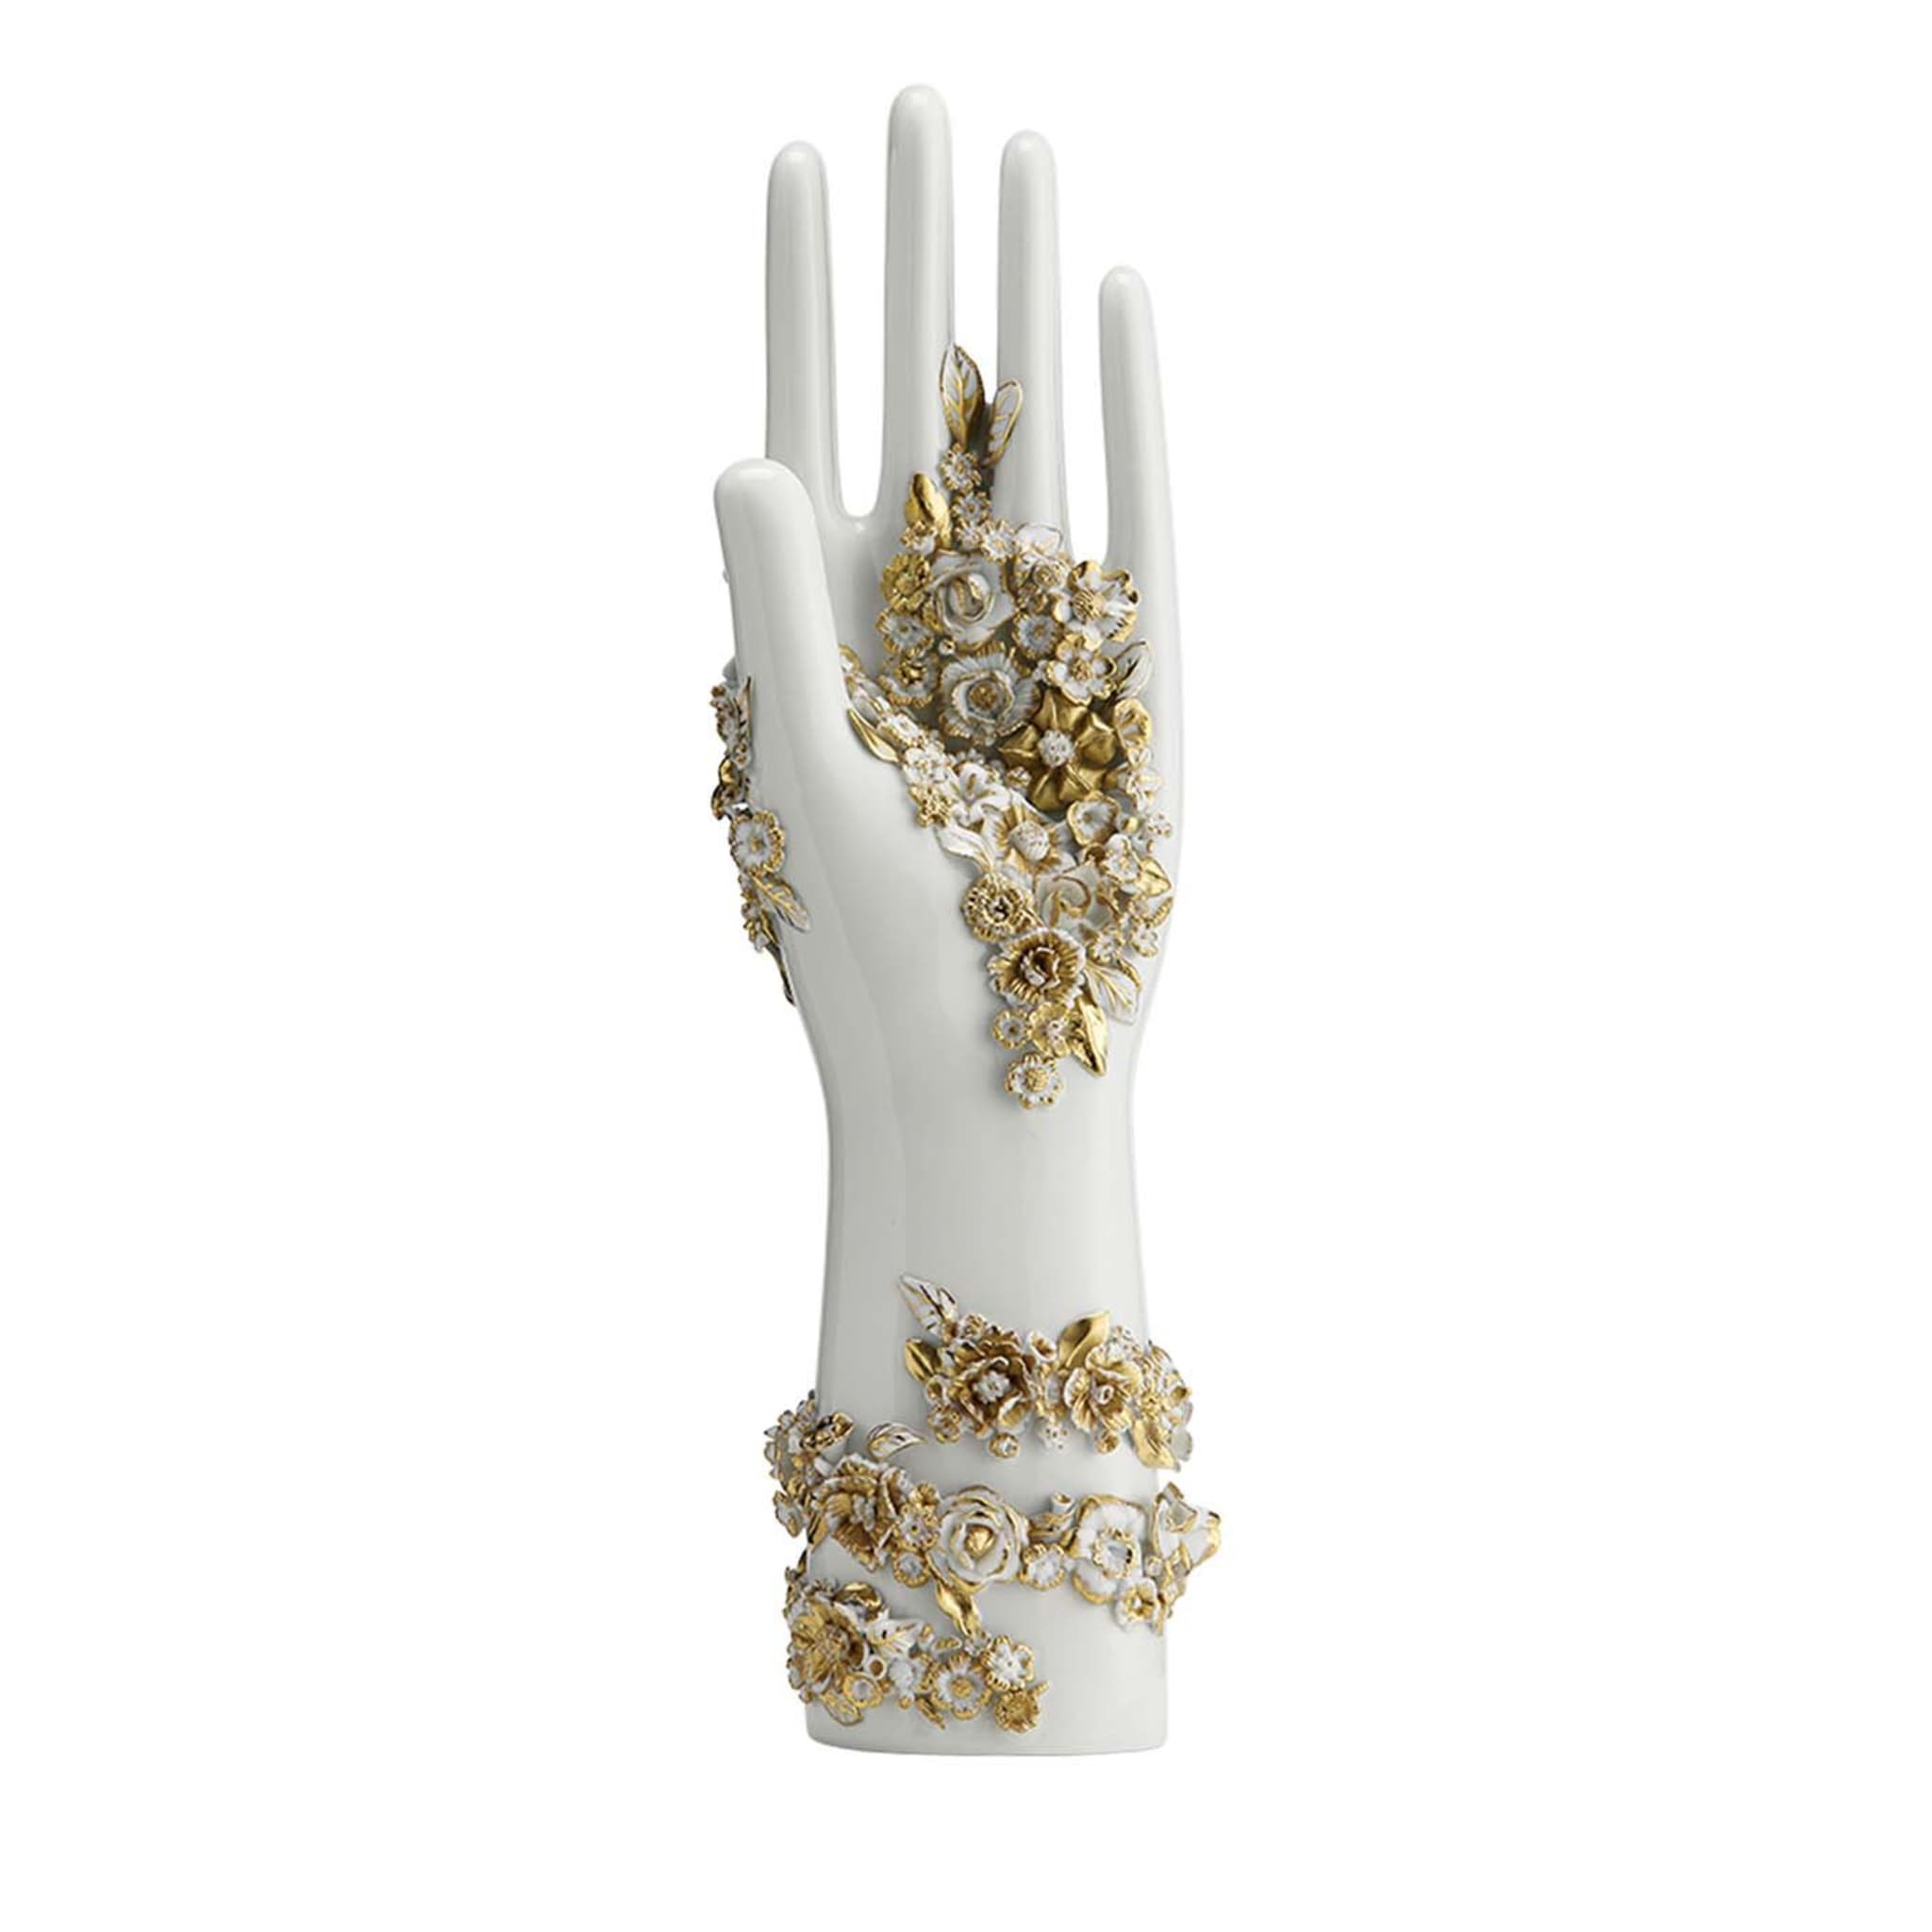 Mano Fiorata Decorative Hand with Gold - Limited Edition by Gio Ponti - Main view